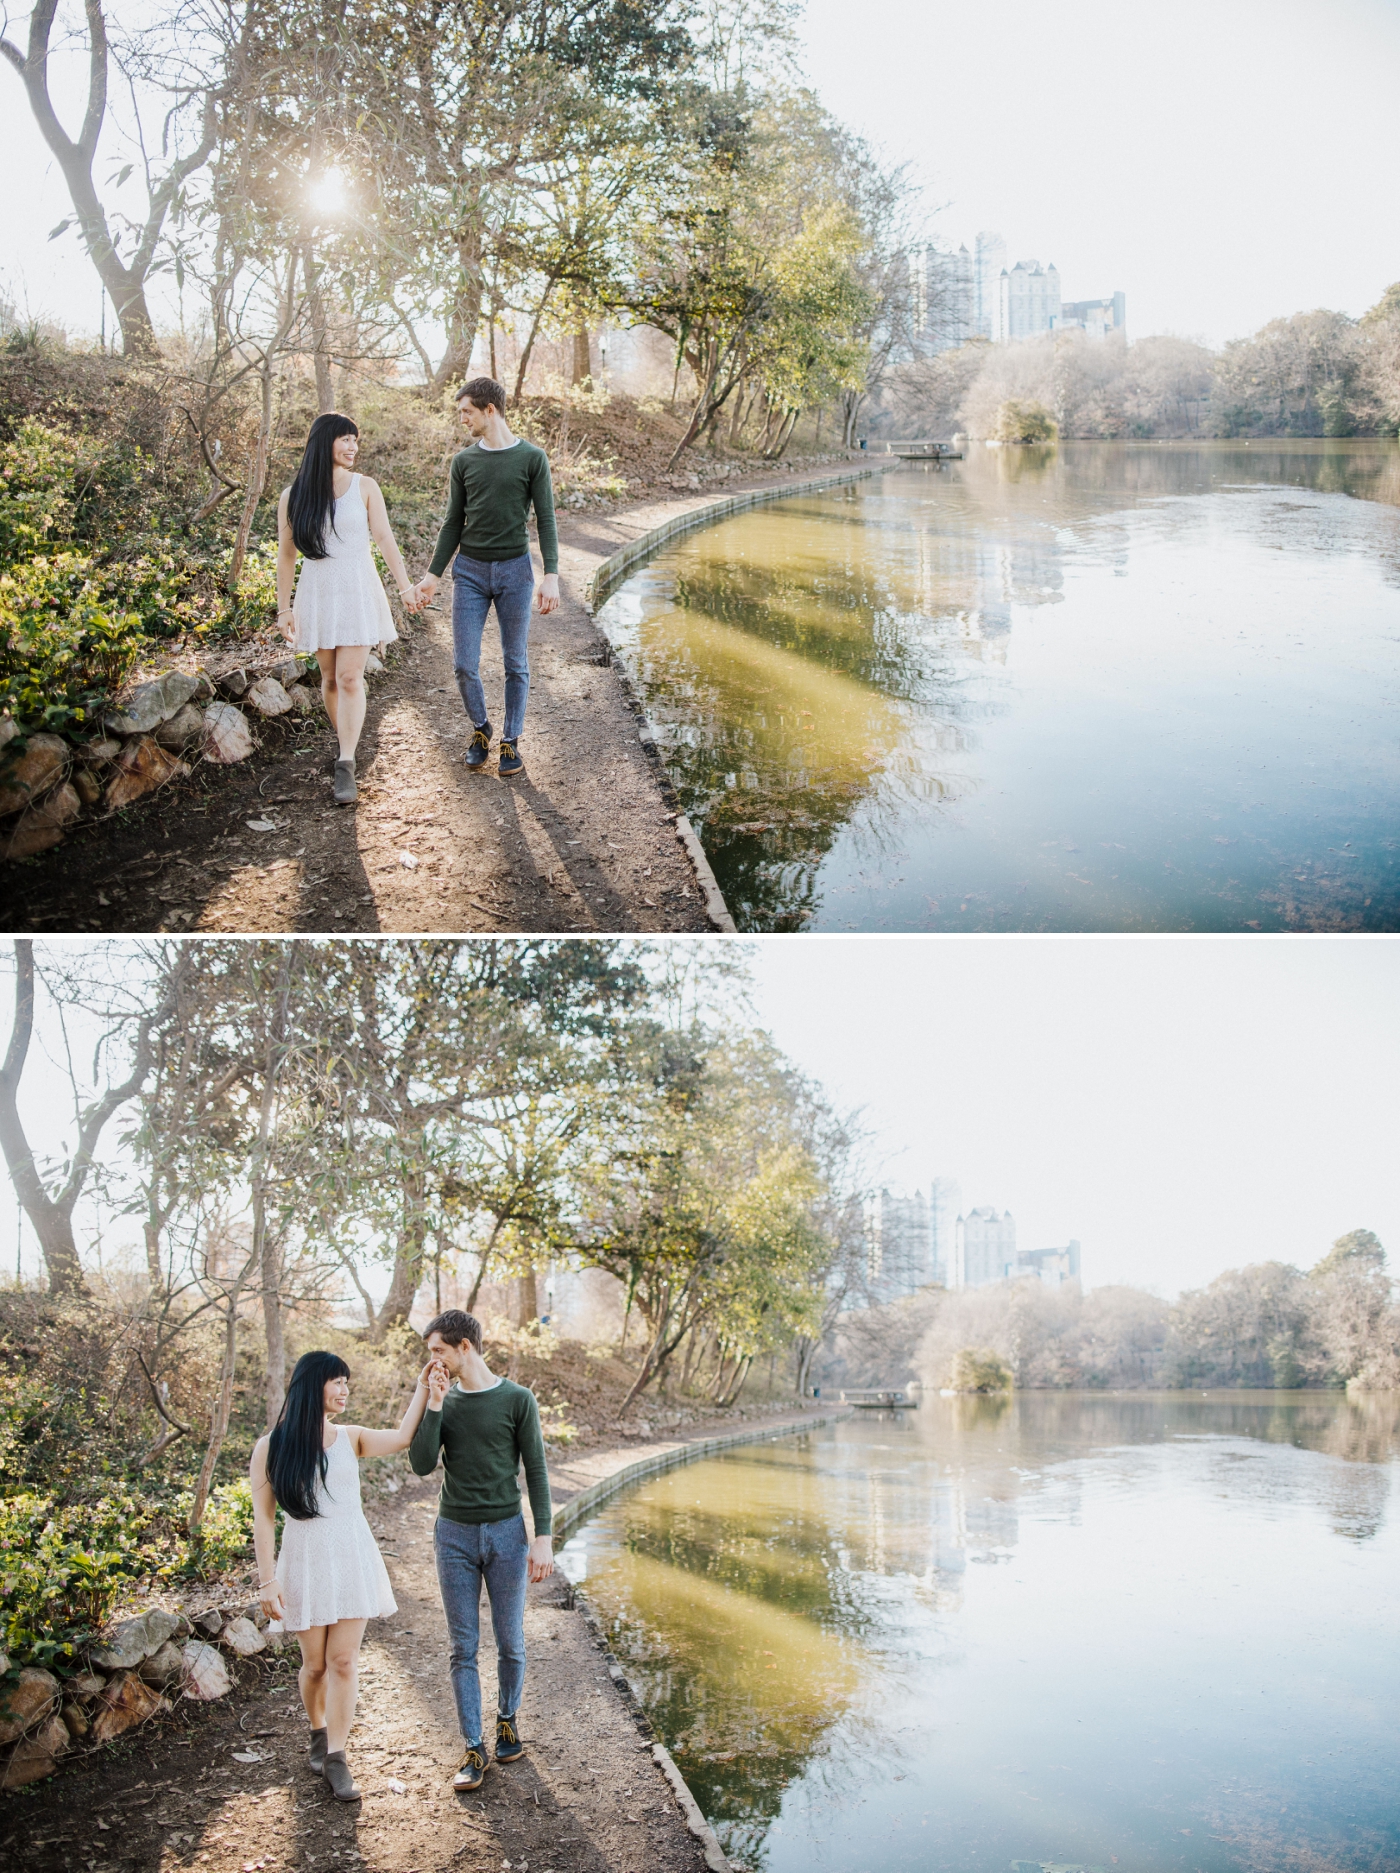 Piedmont Park Engagement Session by Izzy and Co.